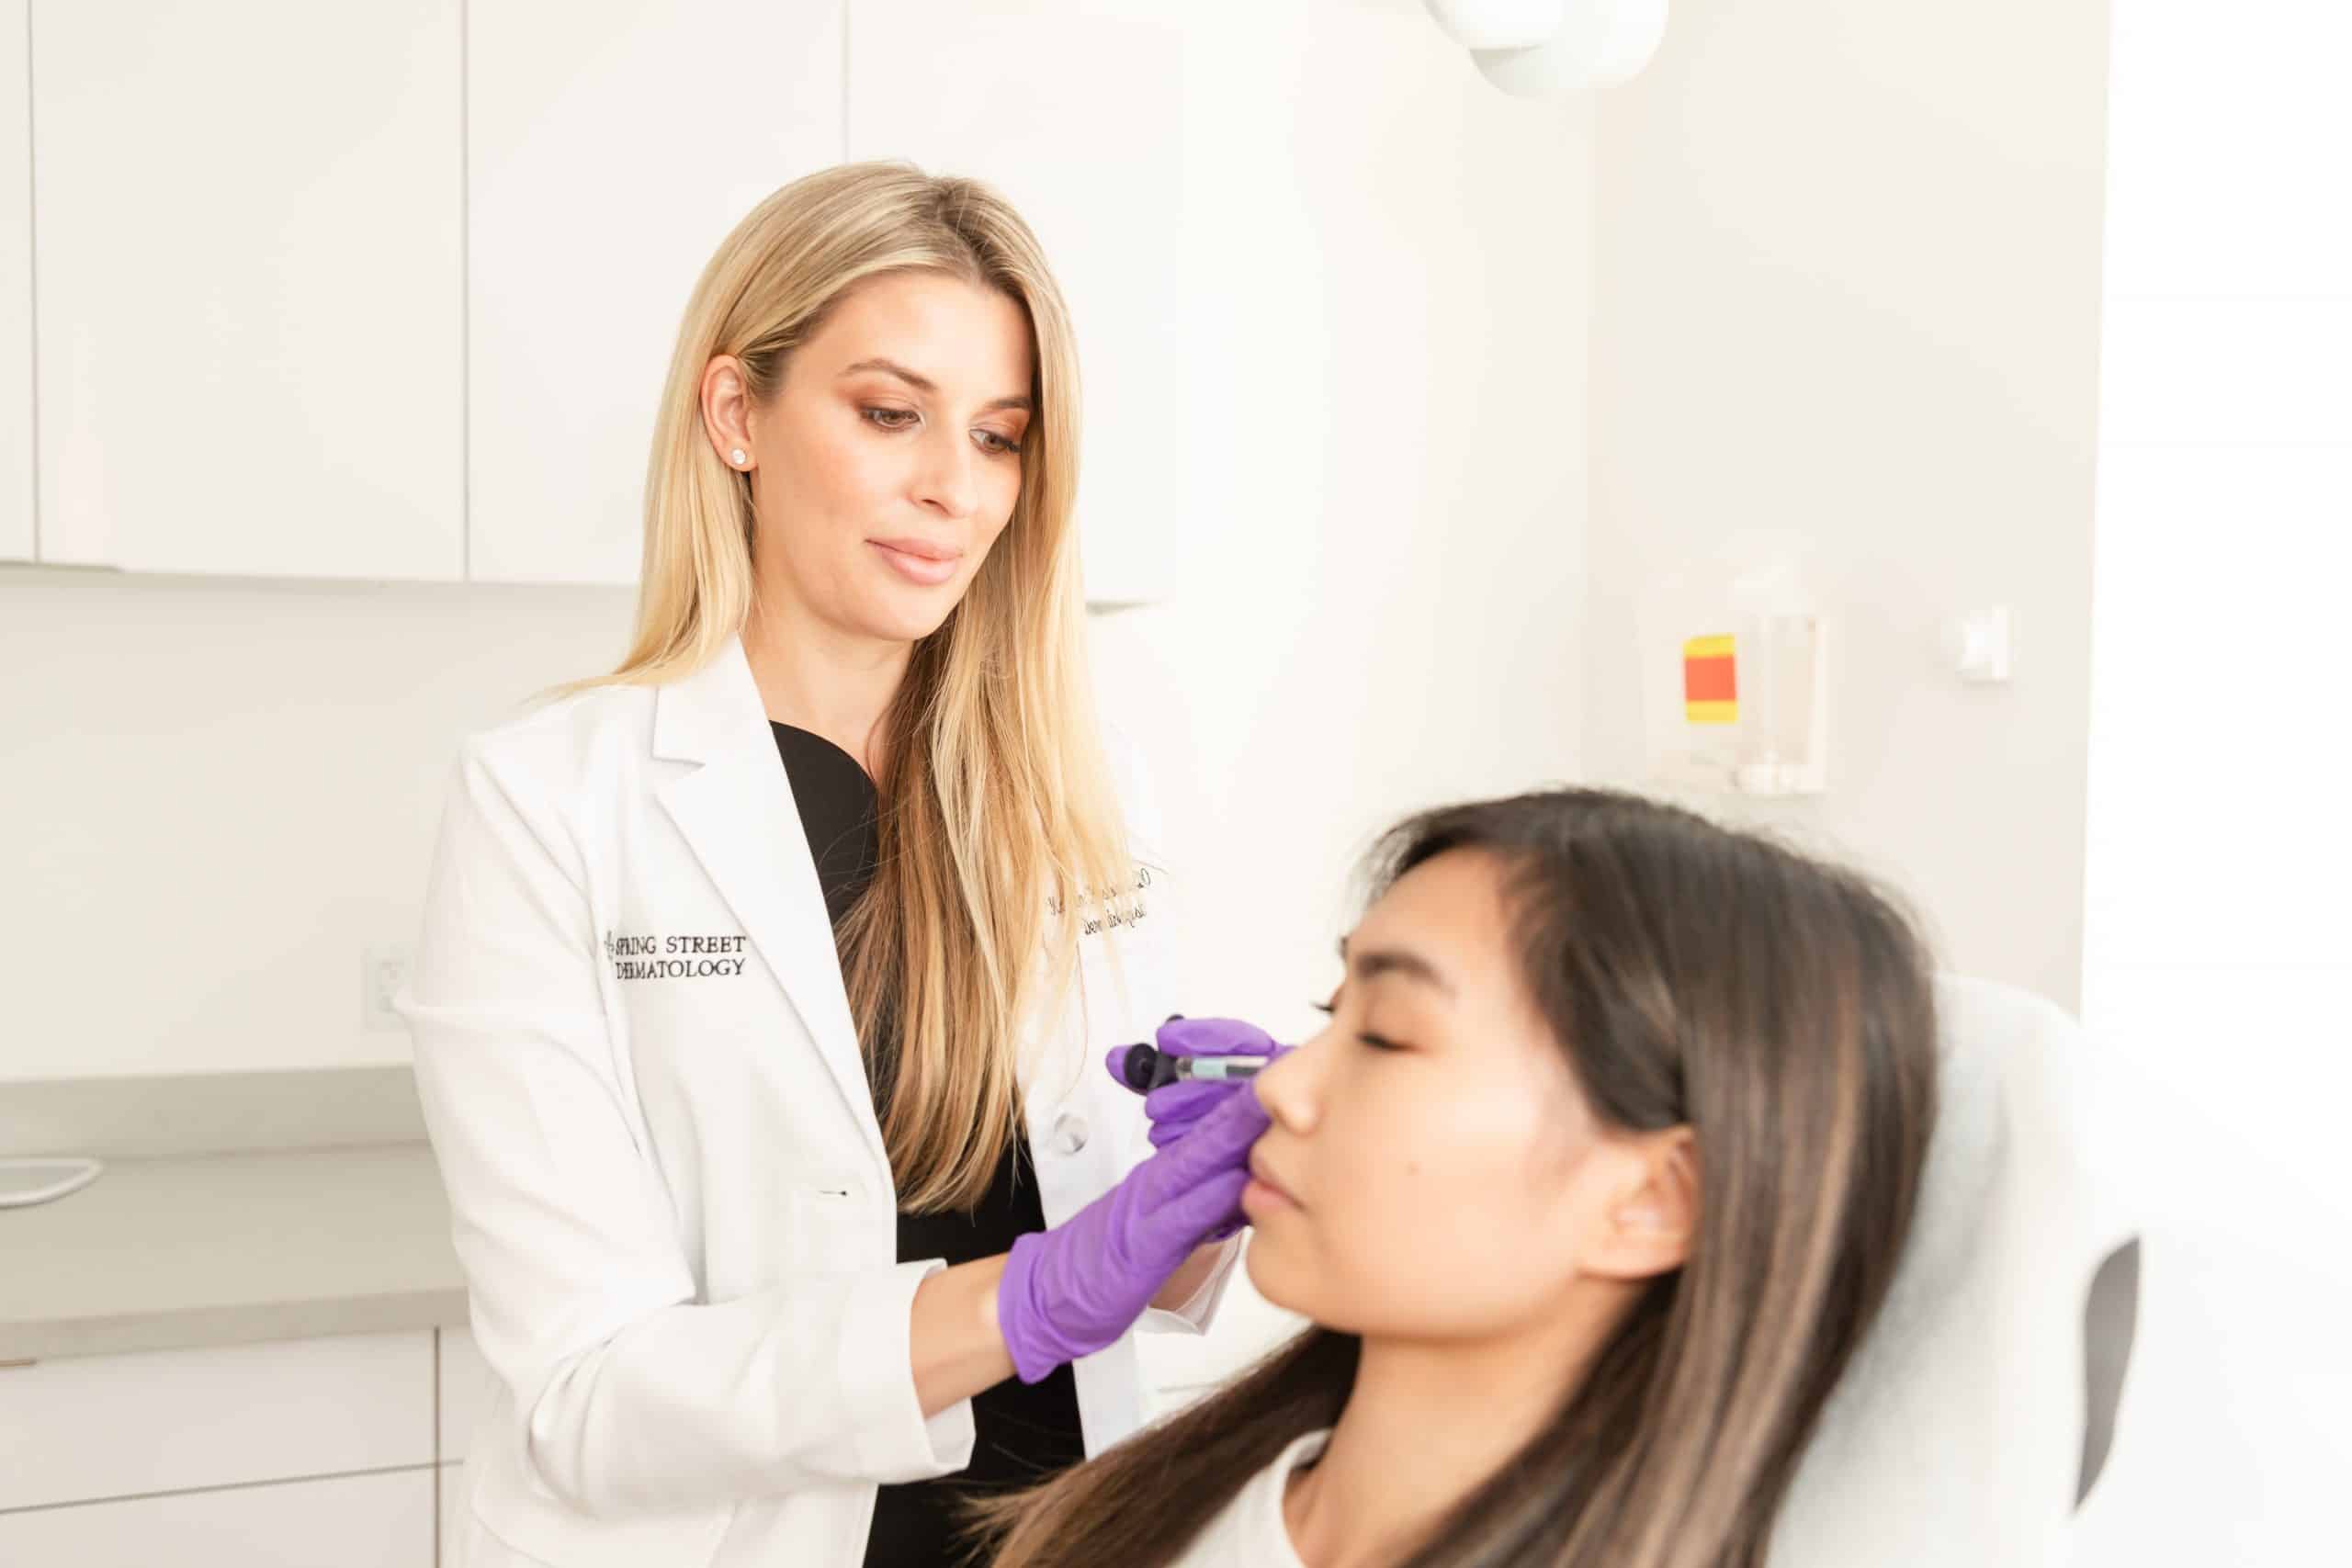 patient receiving Restylane® Refyne and Defyne dermal filler injections from a NYC dermatologist